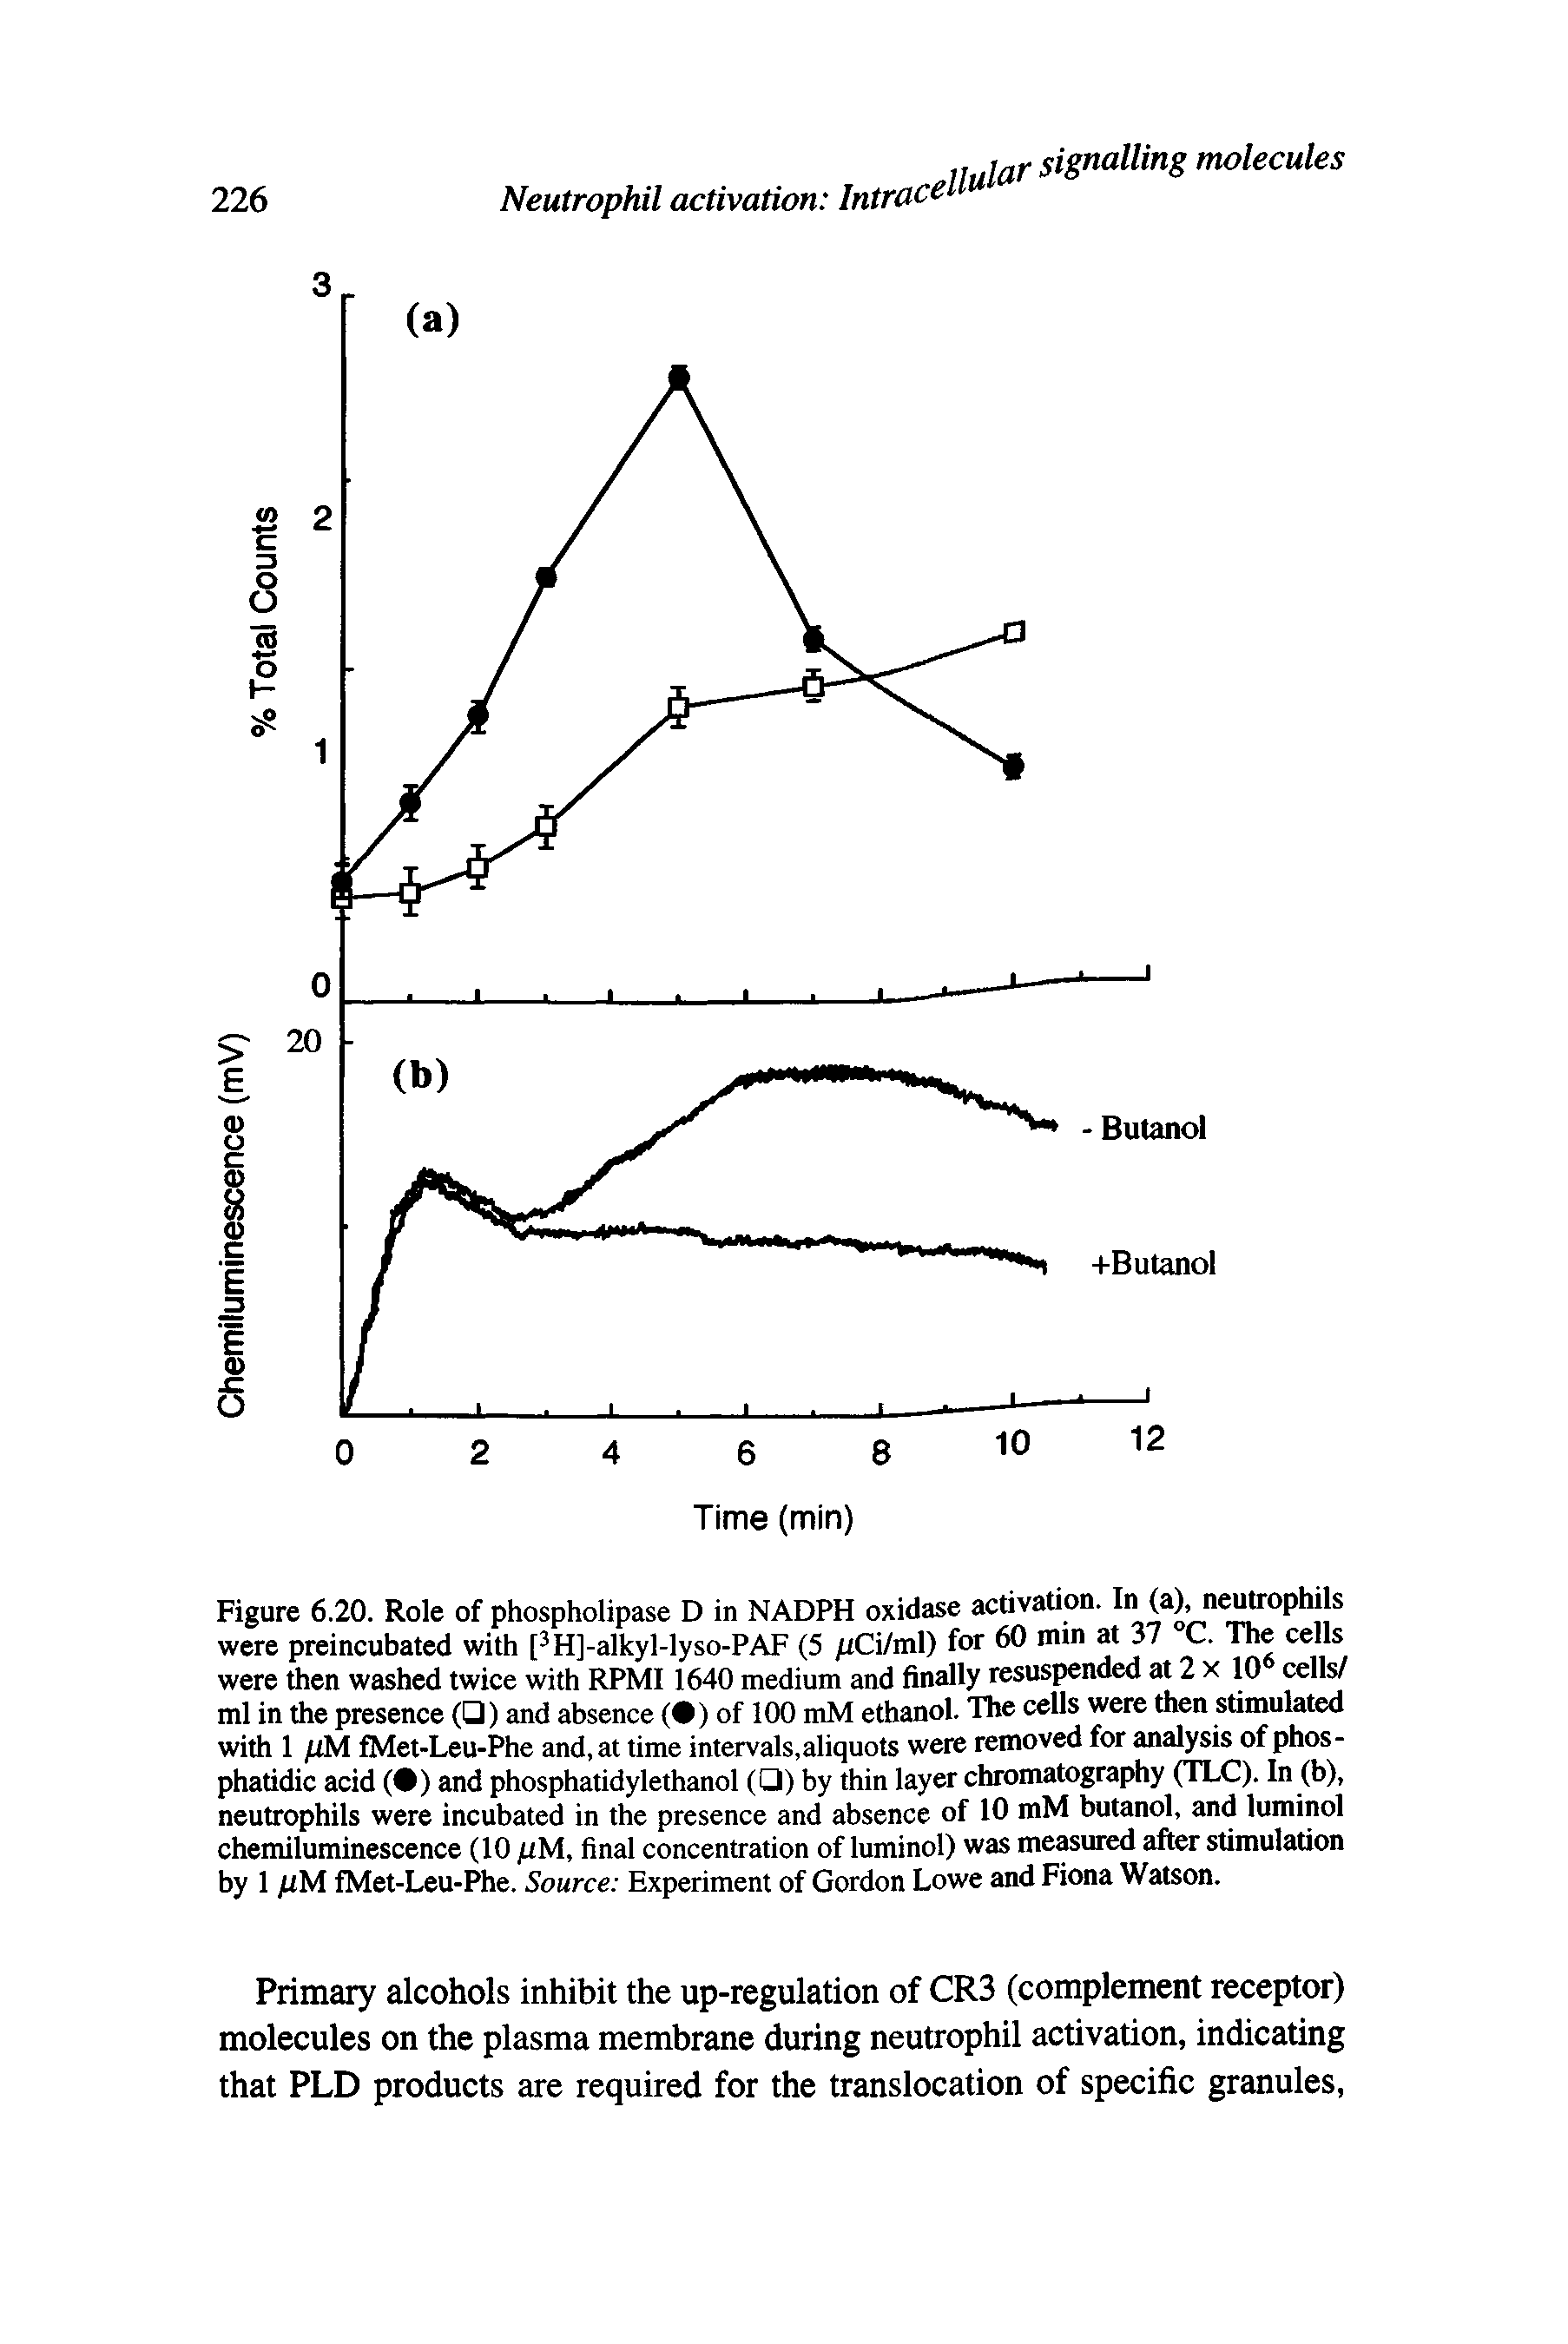 Figure 6.20. Role of phospholipase D in NADPH oxidase activation. In (a) neimophils were preincubated with [3H]-alkyl-lyso-PAF (5 /iCi/ml) for 60 nun at 37 C. The cells were then washed twice with RPMI 1640 medium and finally resuspended at 2 x 10 cells/ ml in the presence ( ) and absence ( ) of 100 mM ethanol. The cells were then stimulated with 1 pM fMet-Leu-Phe and, at time intervals,aliquots were removed for analysis ofphos-phatidic acid ( ) and phosphatidylethanol ( ) by thin layer chromatography (TLC). In (b), neutrophils were incubated in the presence and absence of 10 mM butanol, and luminol chemiluminescence (10 jUM, final concentration of luminol) was measured after stimulation by 1 jUM fMet-Leu-Phe. Source Experiment of Gordon Lowe and Fiona Watson.